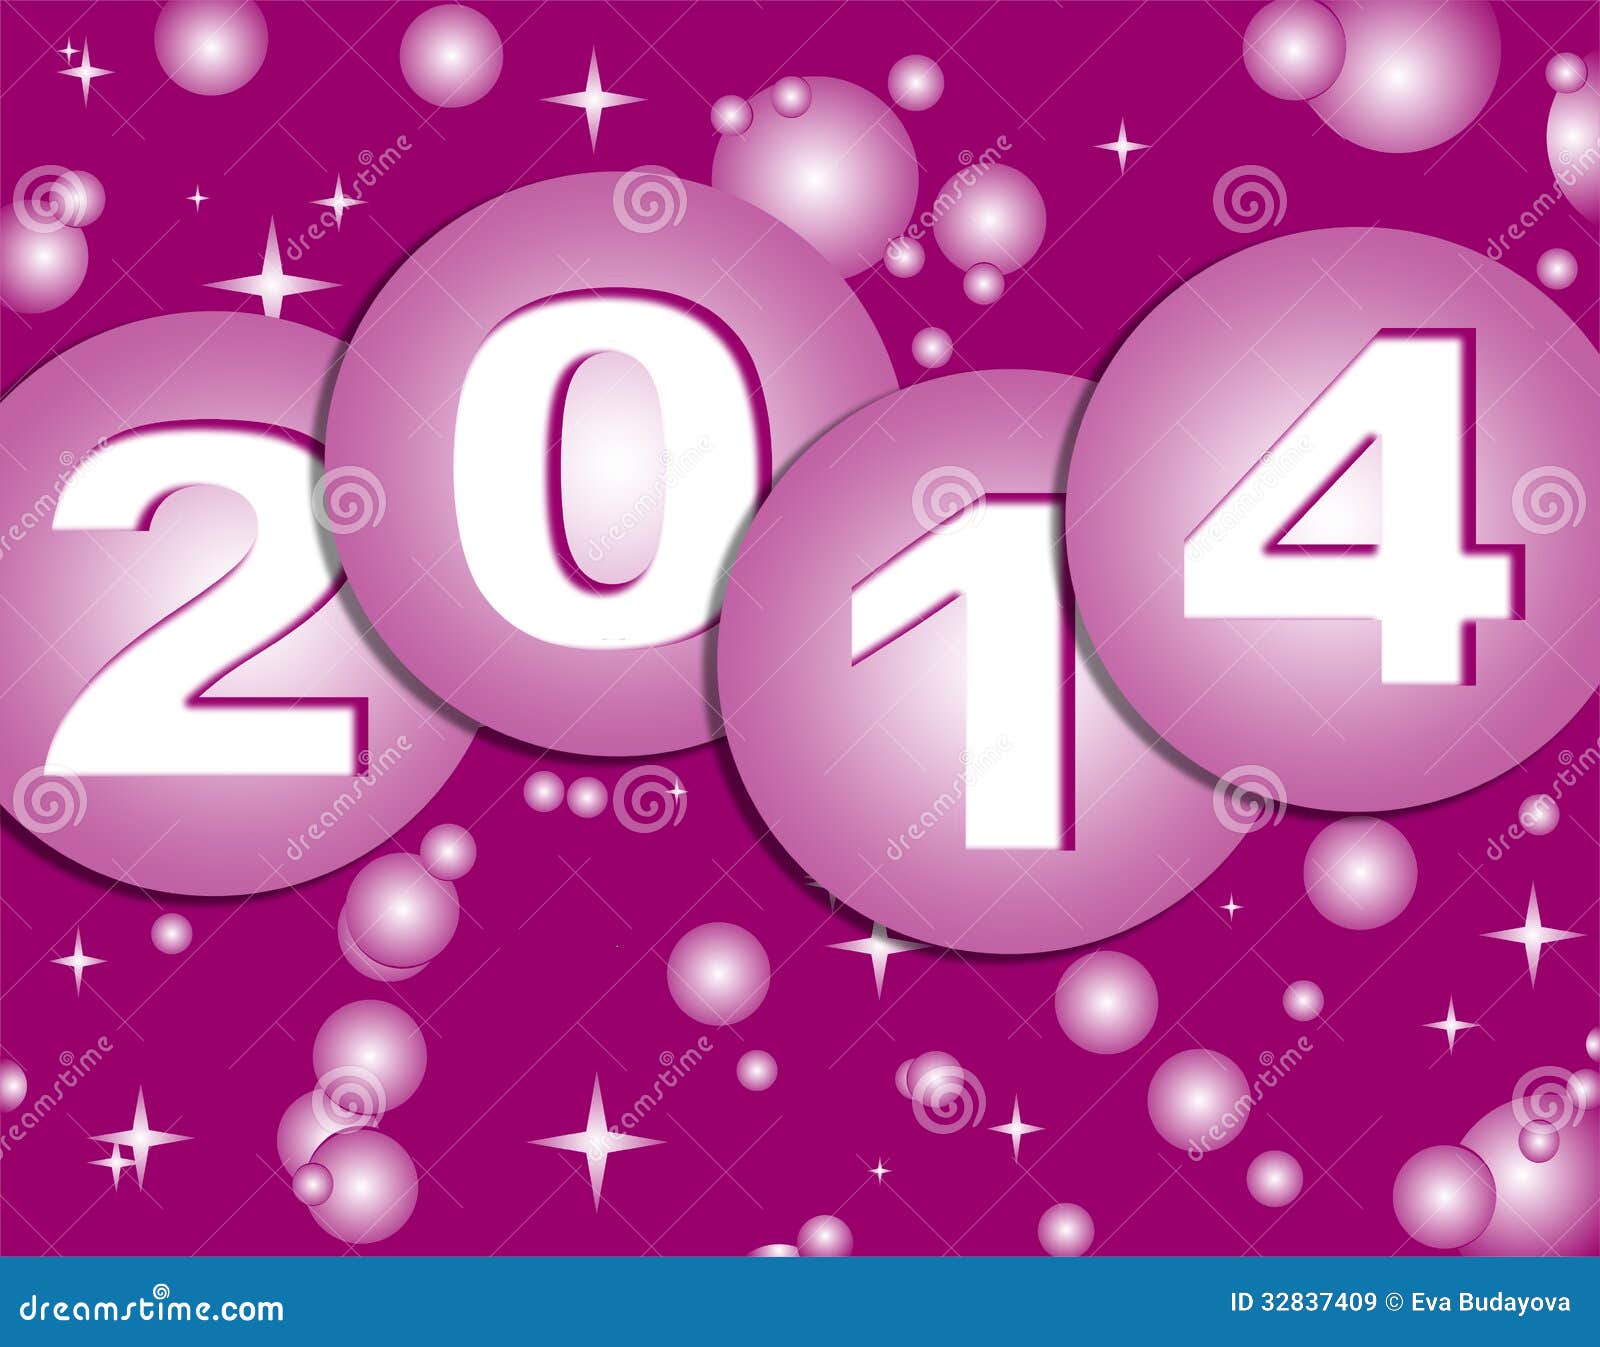 free animated clipart happy new year 2014 - photo #43